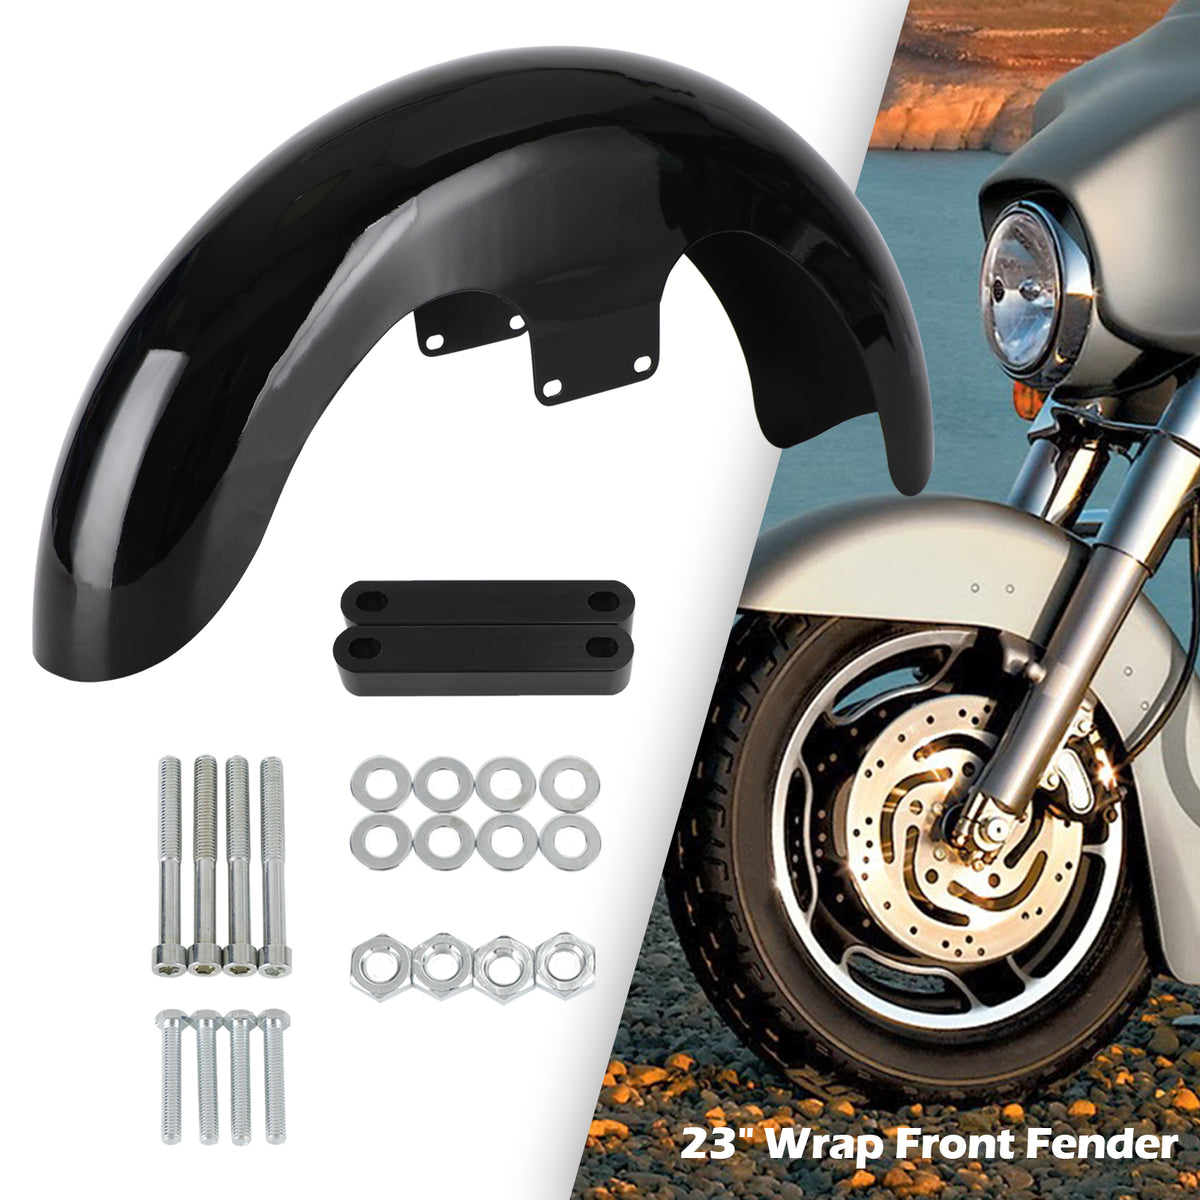 23" Wrap Front Fender For Touring Electra Street Road Glide Baggers FLHT FLHR Generic